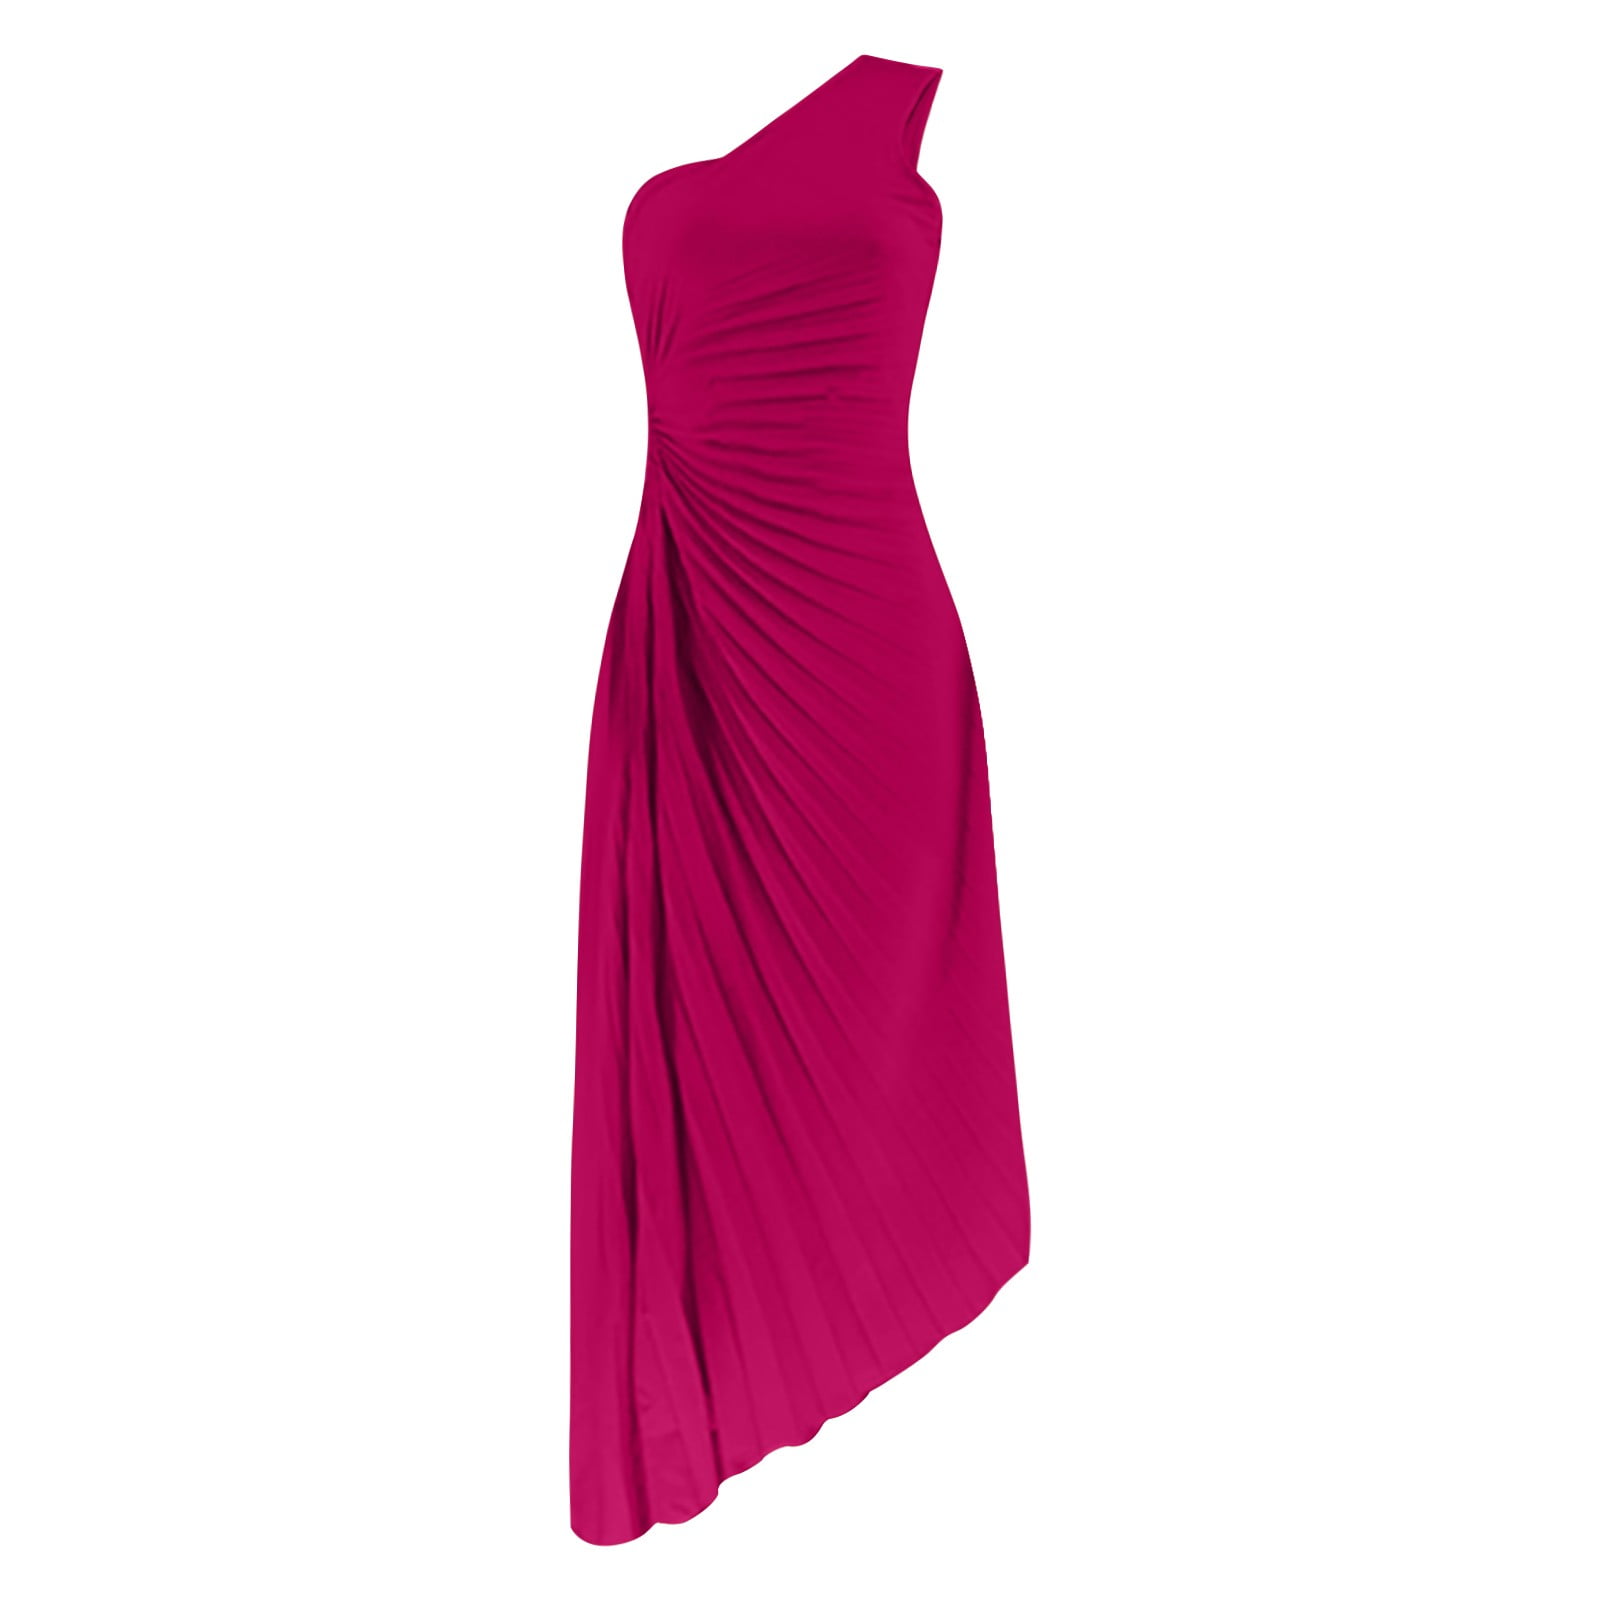 In Color: Pink Collection, Women's Designer Clothing